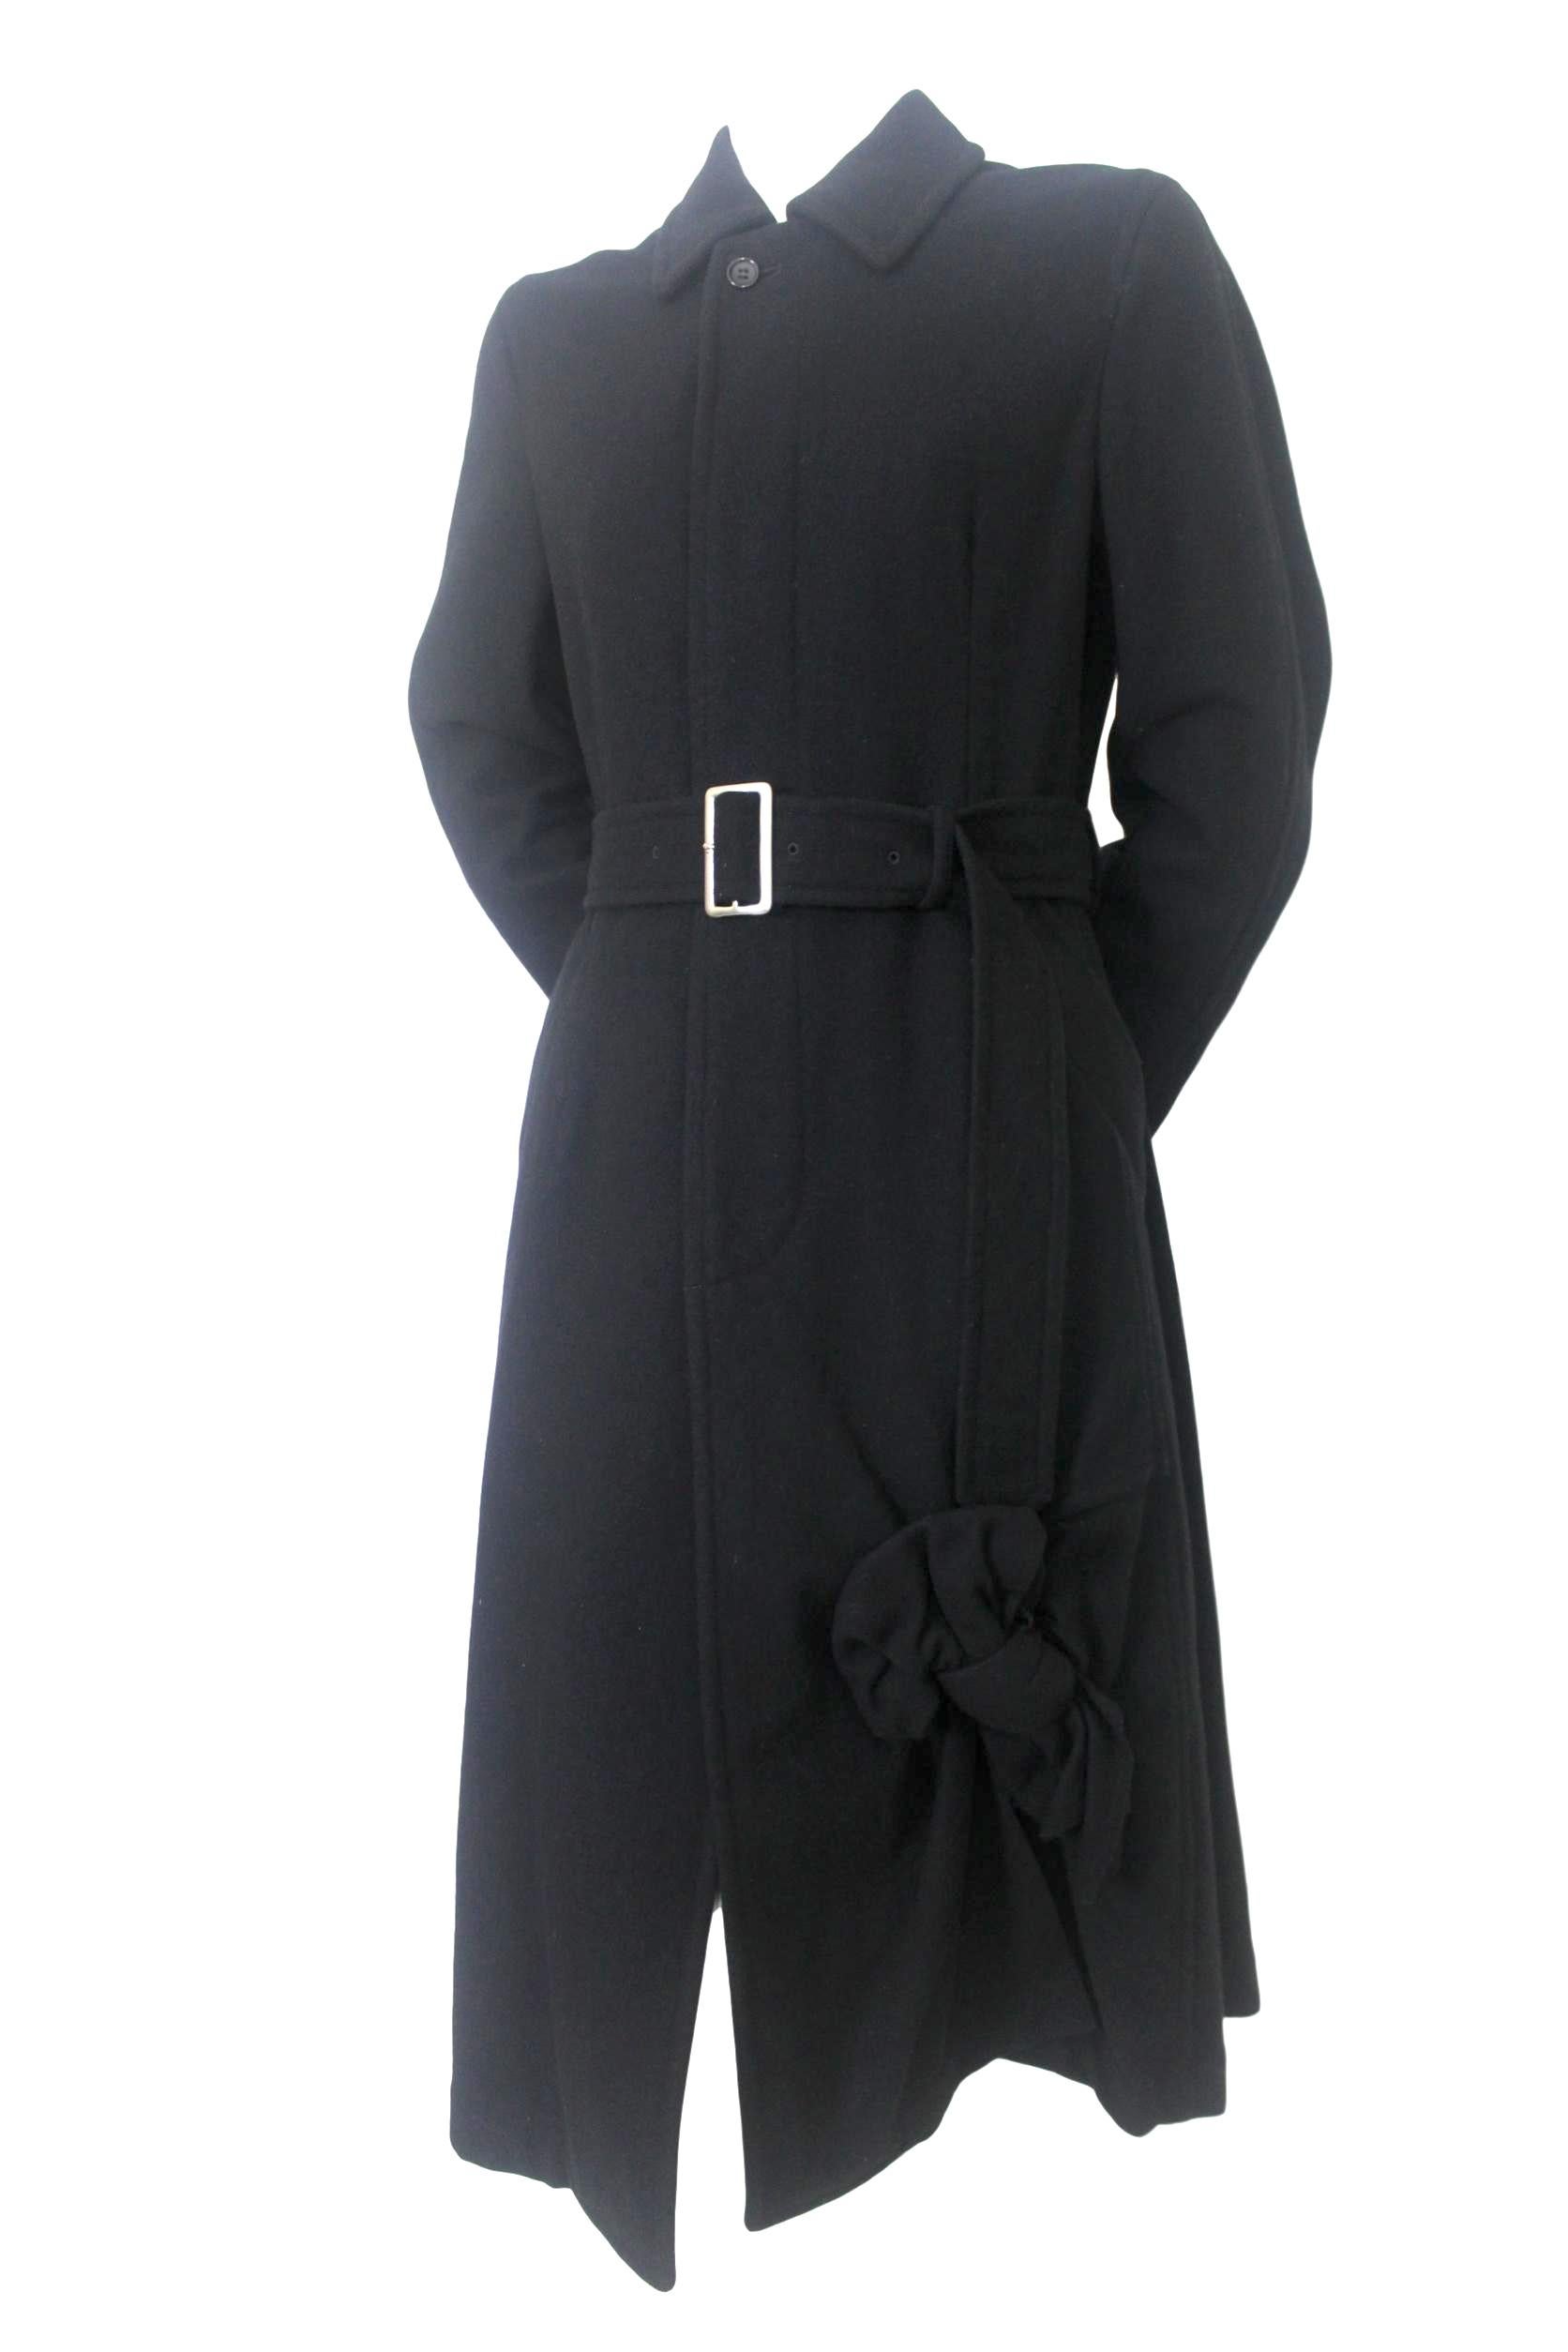 Comme des Garcons 2006 Collection Wool Coat with Bow Decoration For Sale 9